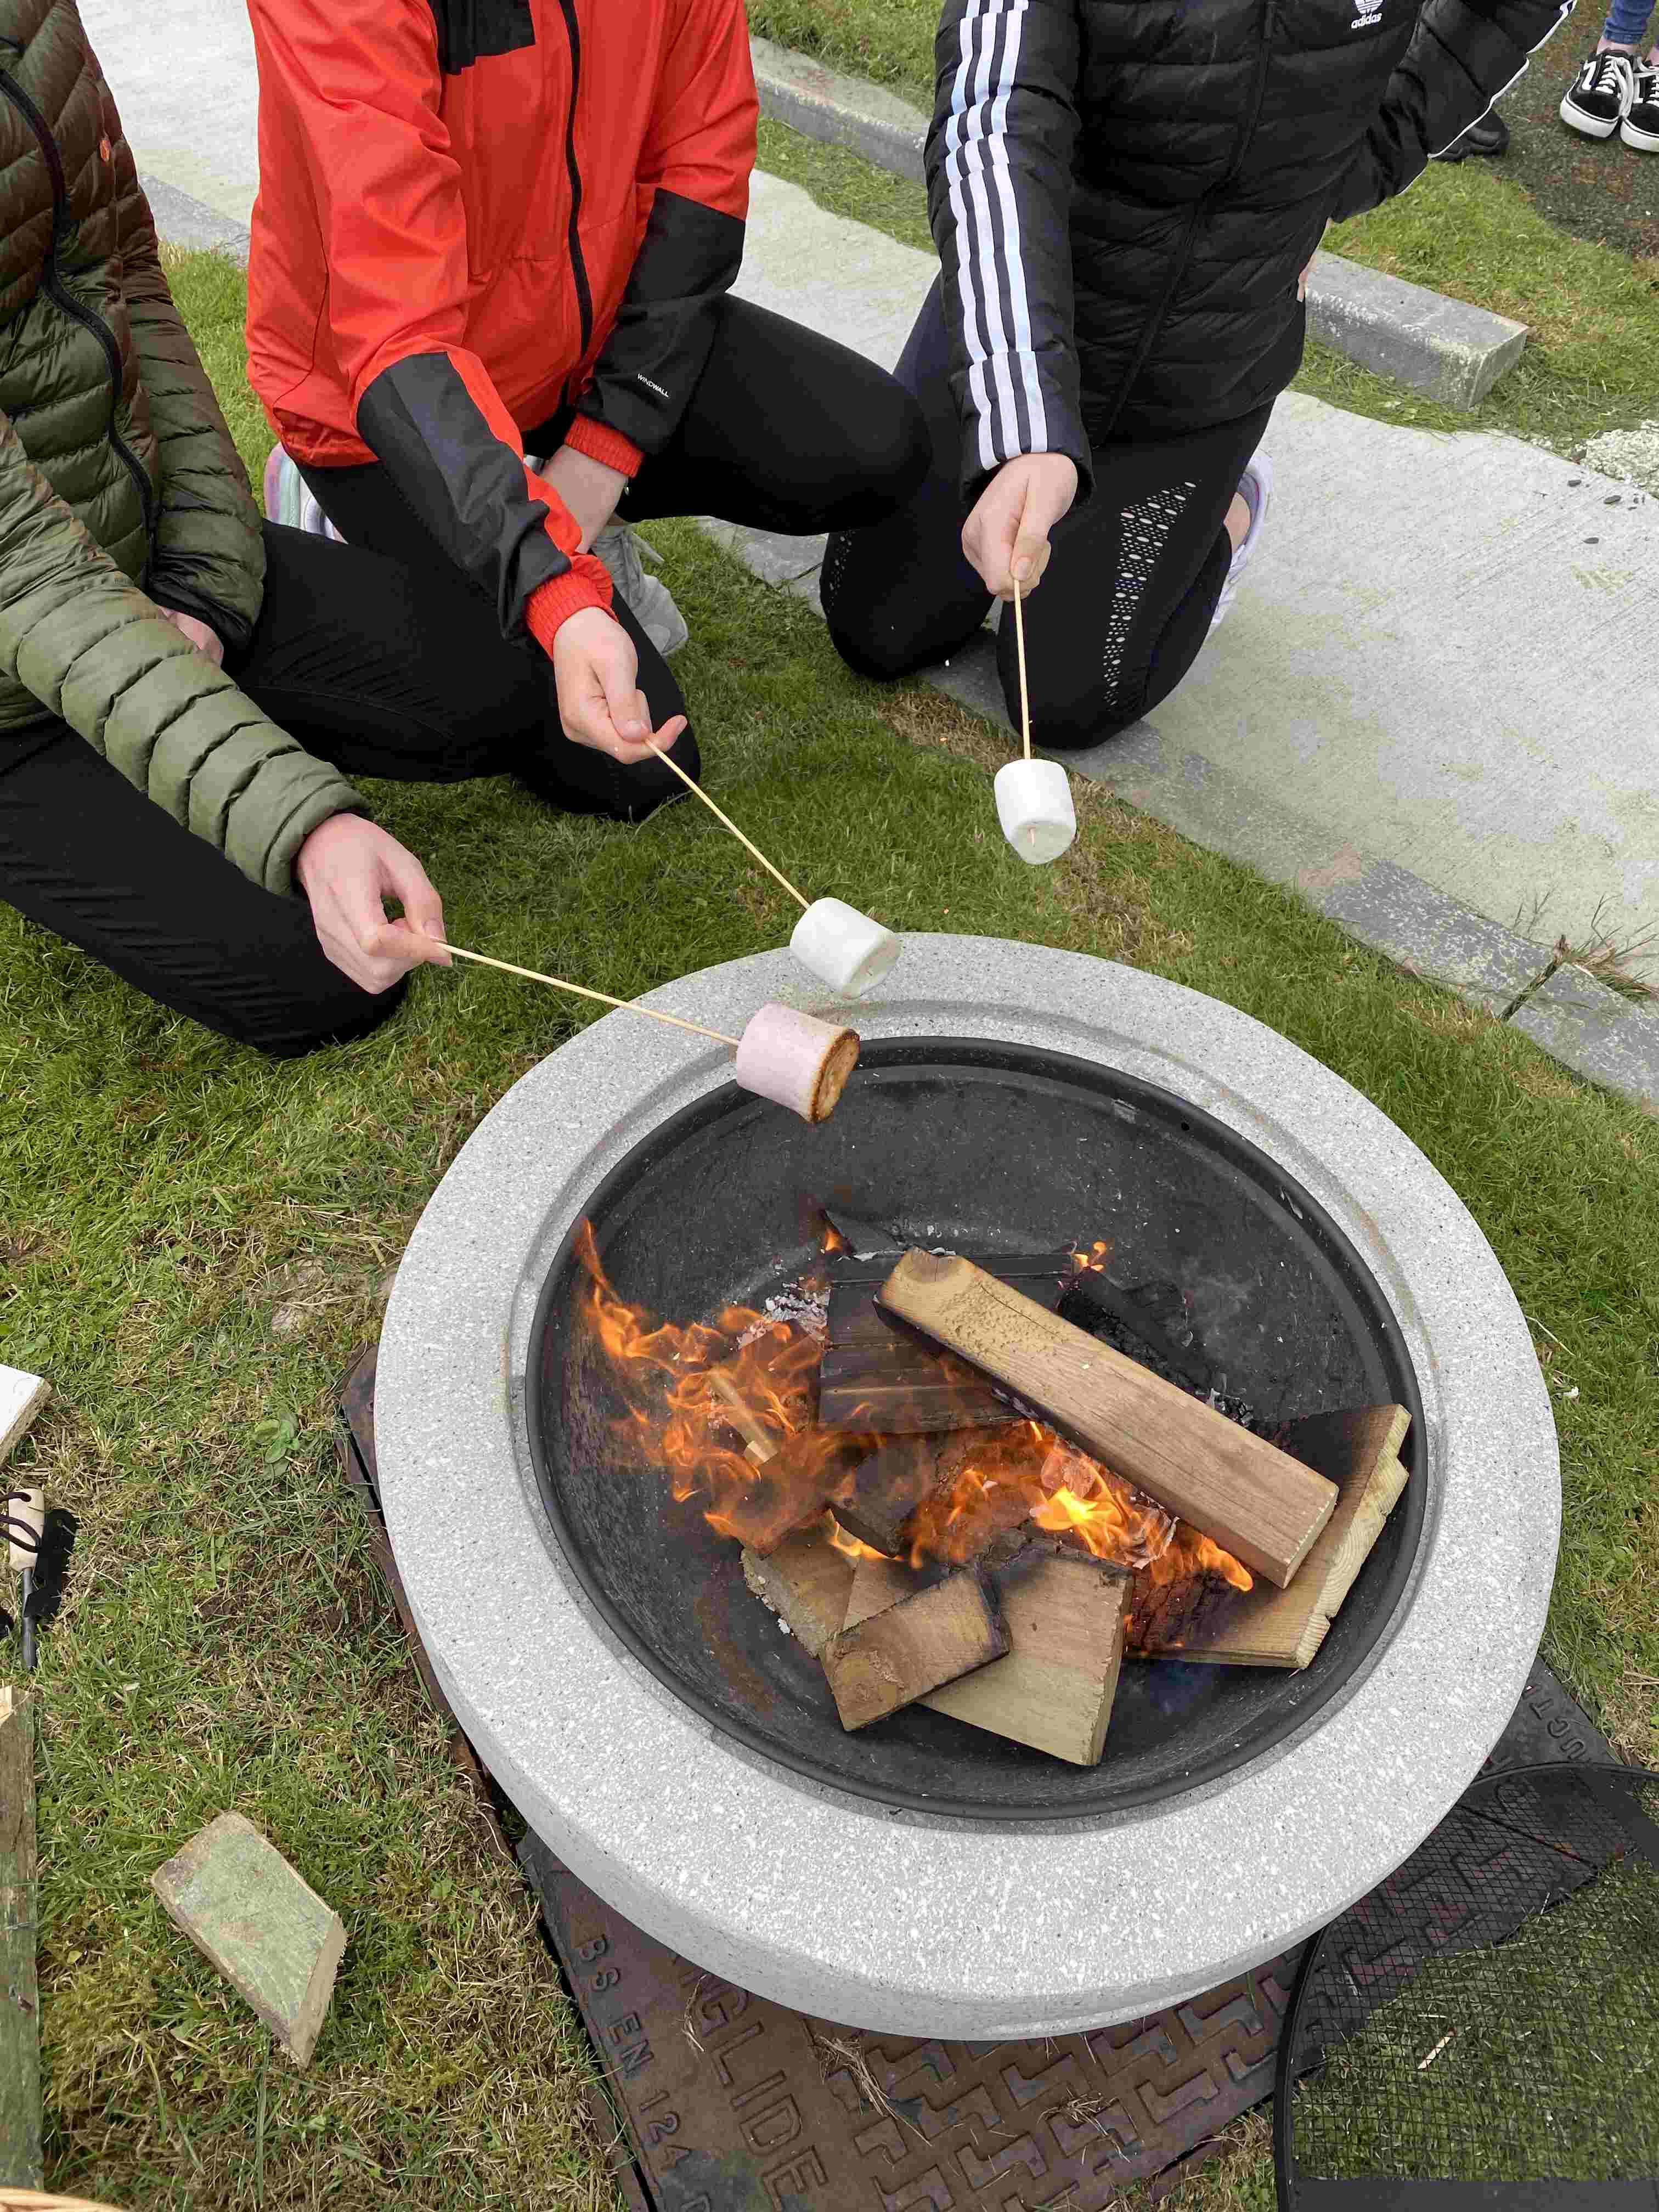 Toasting marshmallows at a fire pit